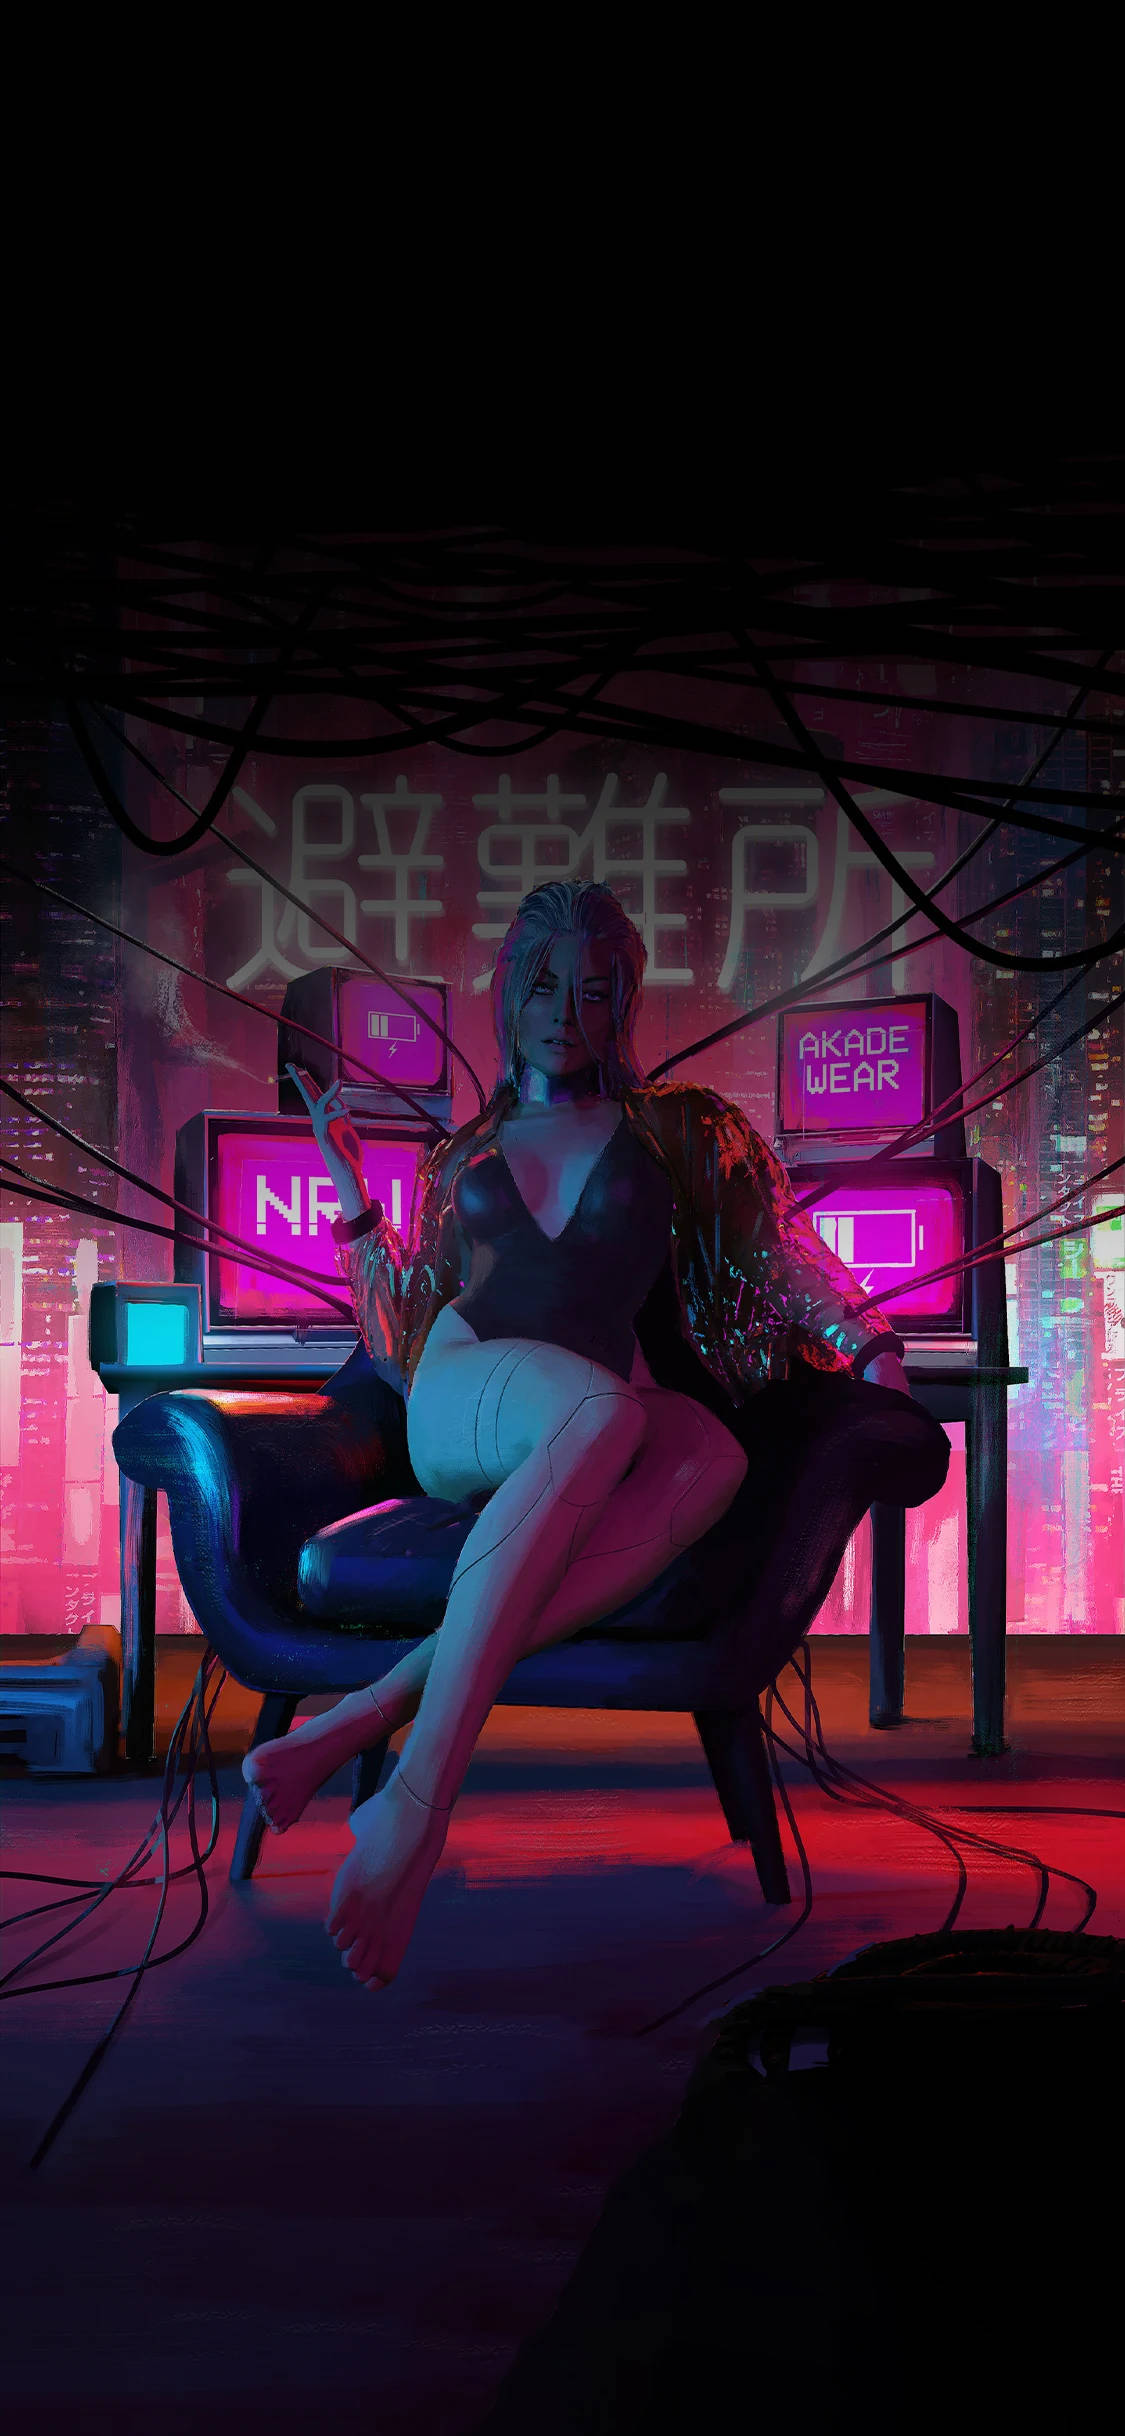 Cyberpunk Female On A Couch Iphone Wallpaper